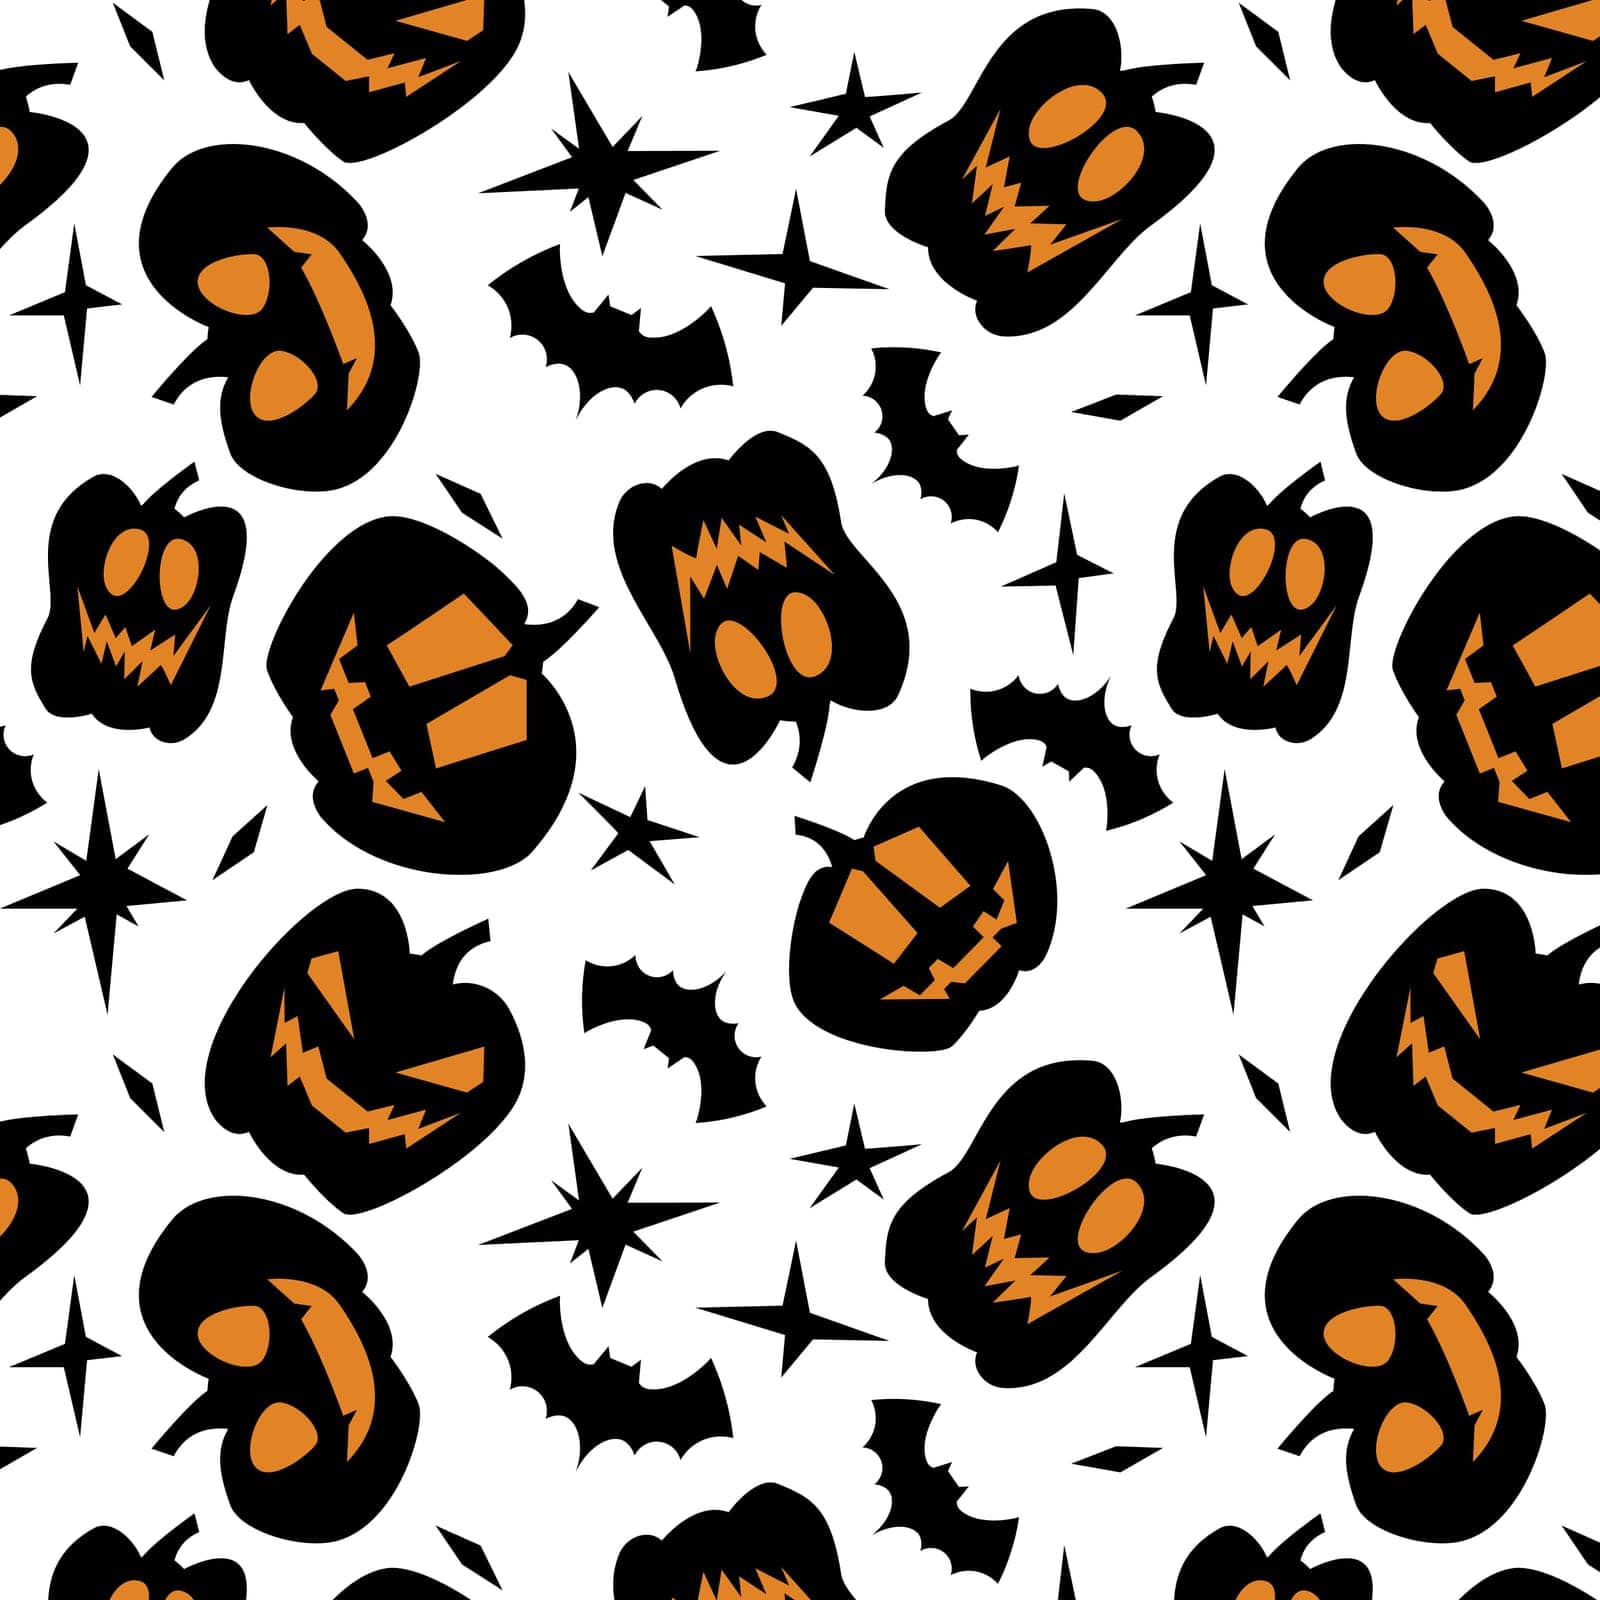 vector illustration of seamless pattern of pumpkins and bats and stars on white background, flat style, Halloween holiday, gift wrapping paper by MarynaSt